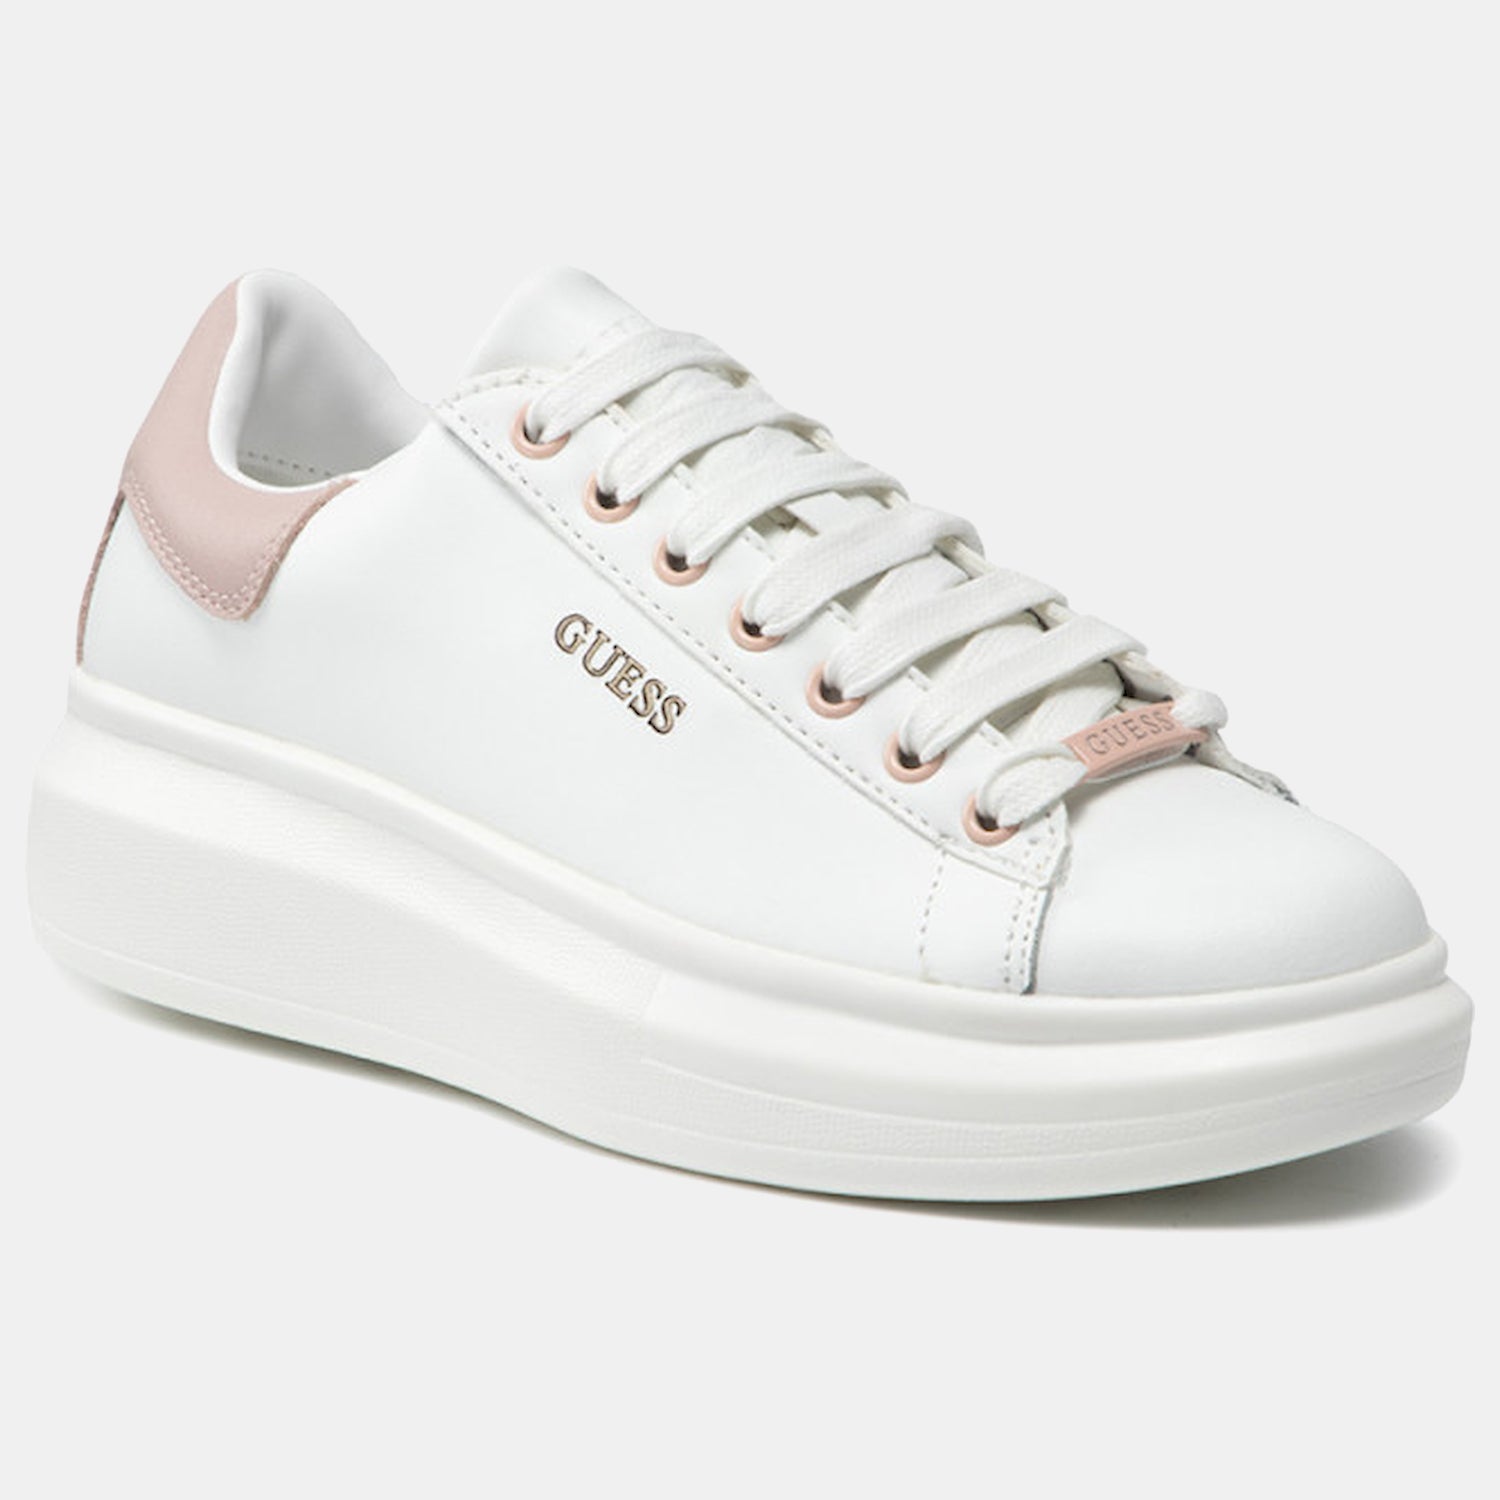 Guess Sapatilhas Sneakers Shoes Fl7rnofal12 Whi Pink Branco Rosa_shot1